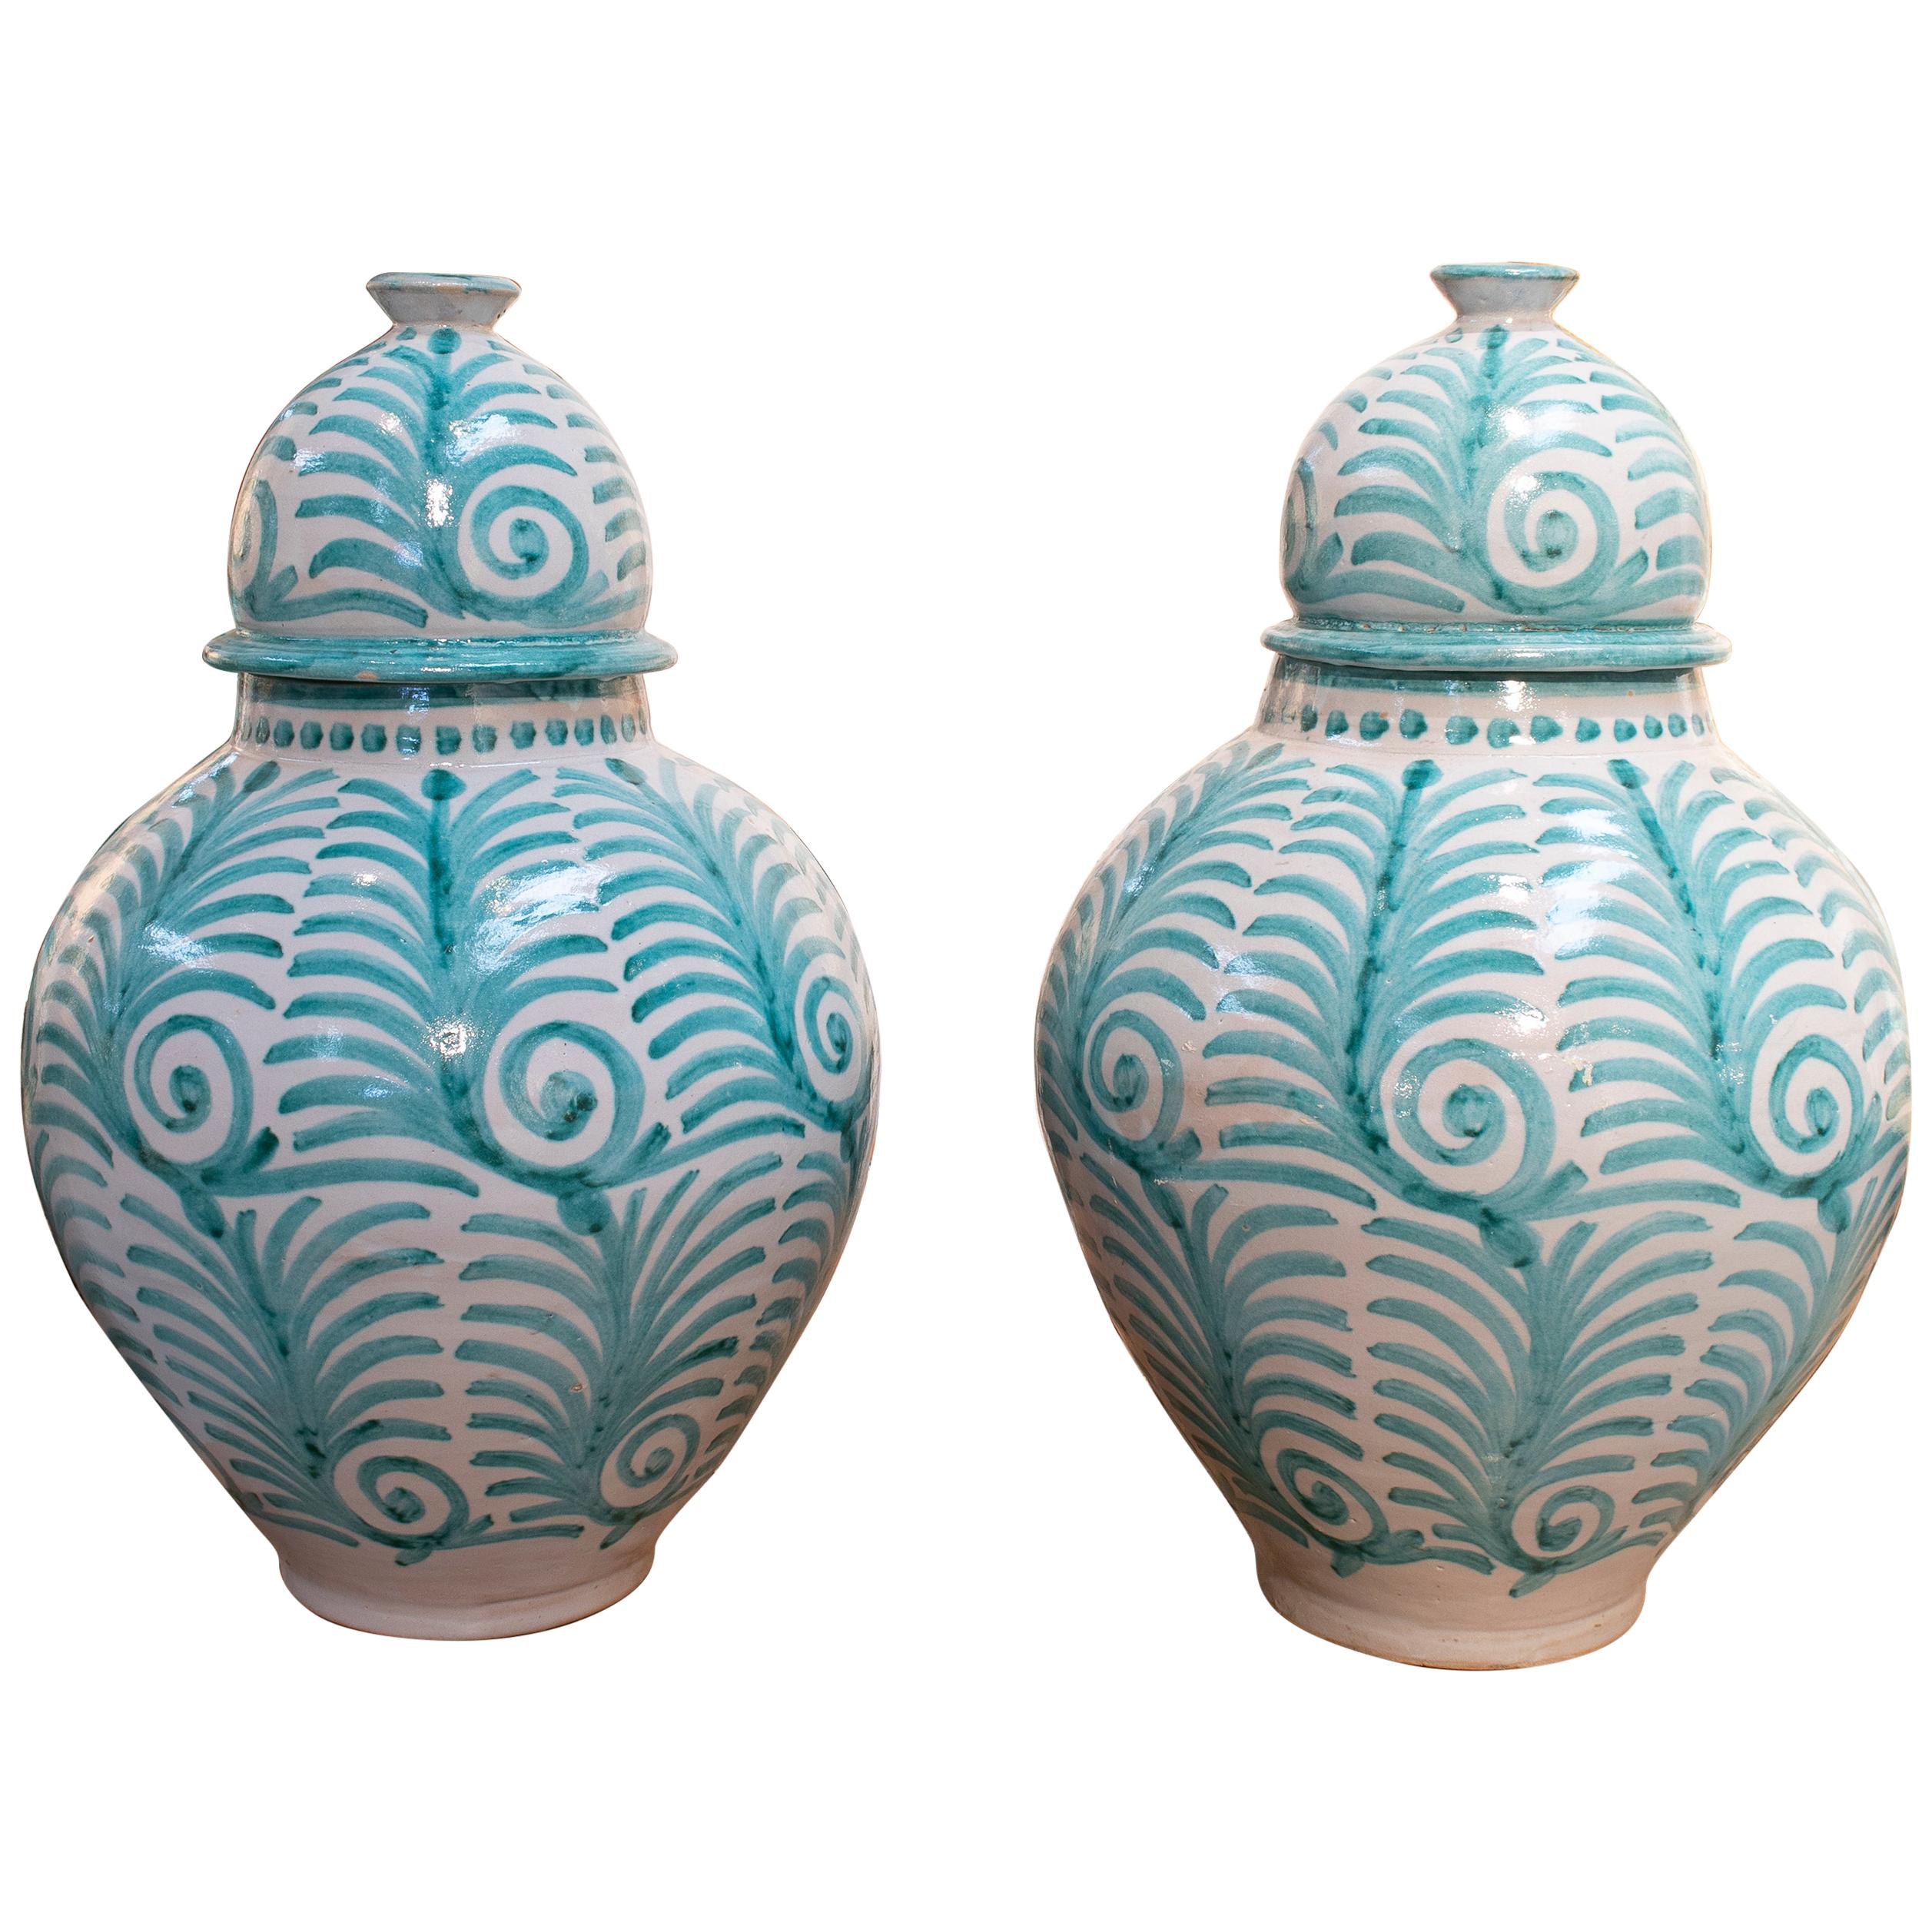 Contemporary Pair of Hand Painted Glazed Terracotta Vases with Lids